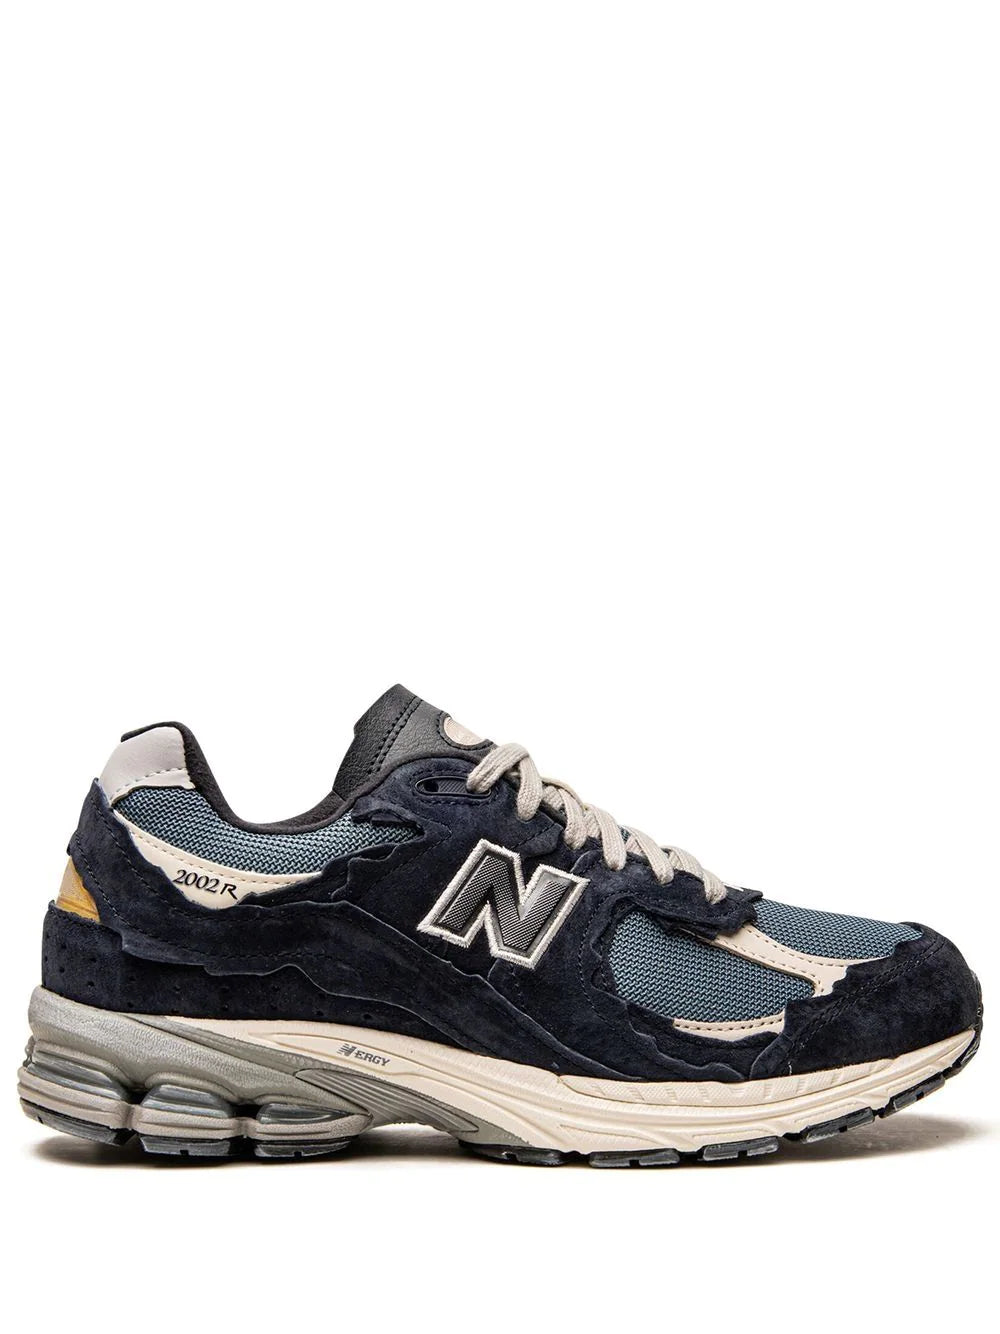 Shoellist | New Balance 2002R Protection Pack - Dark Navy sneakers